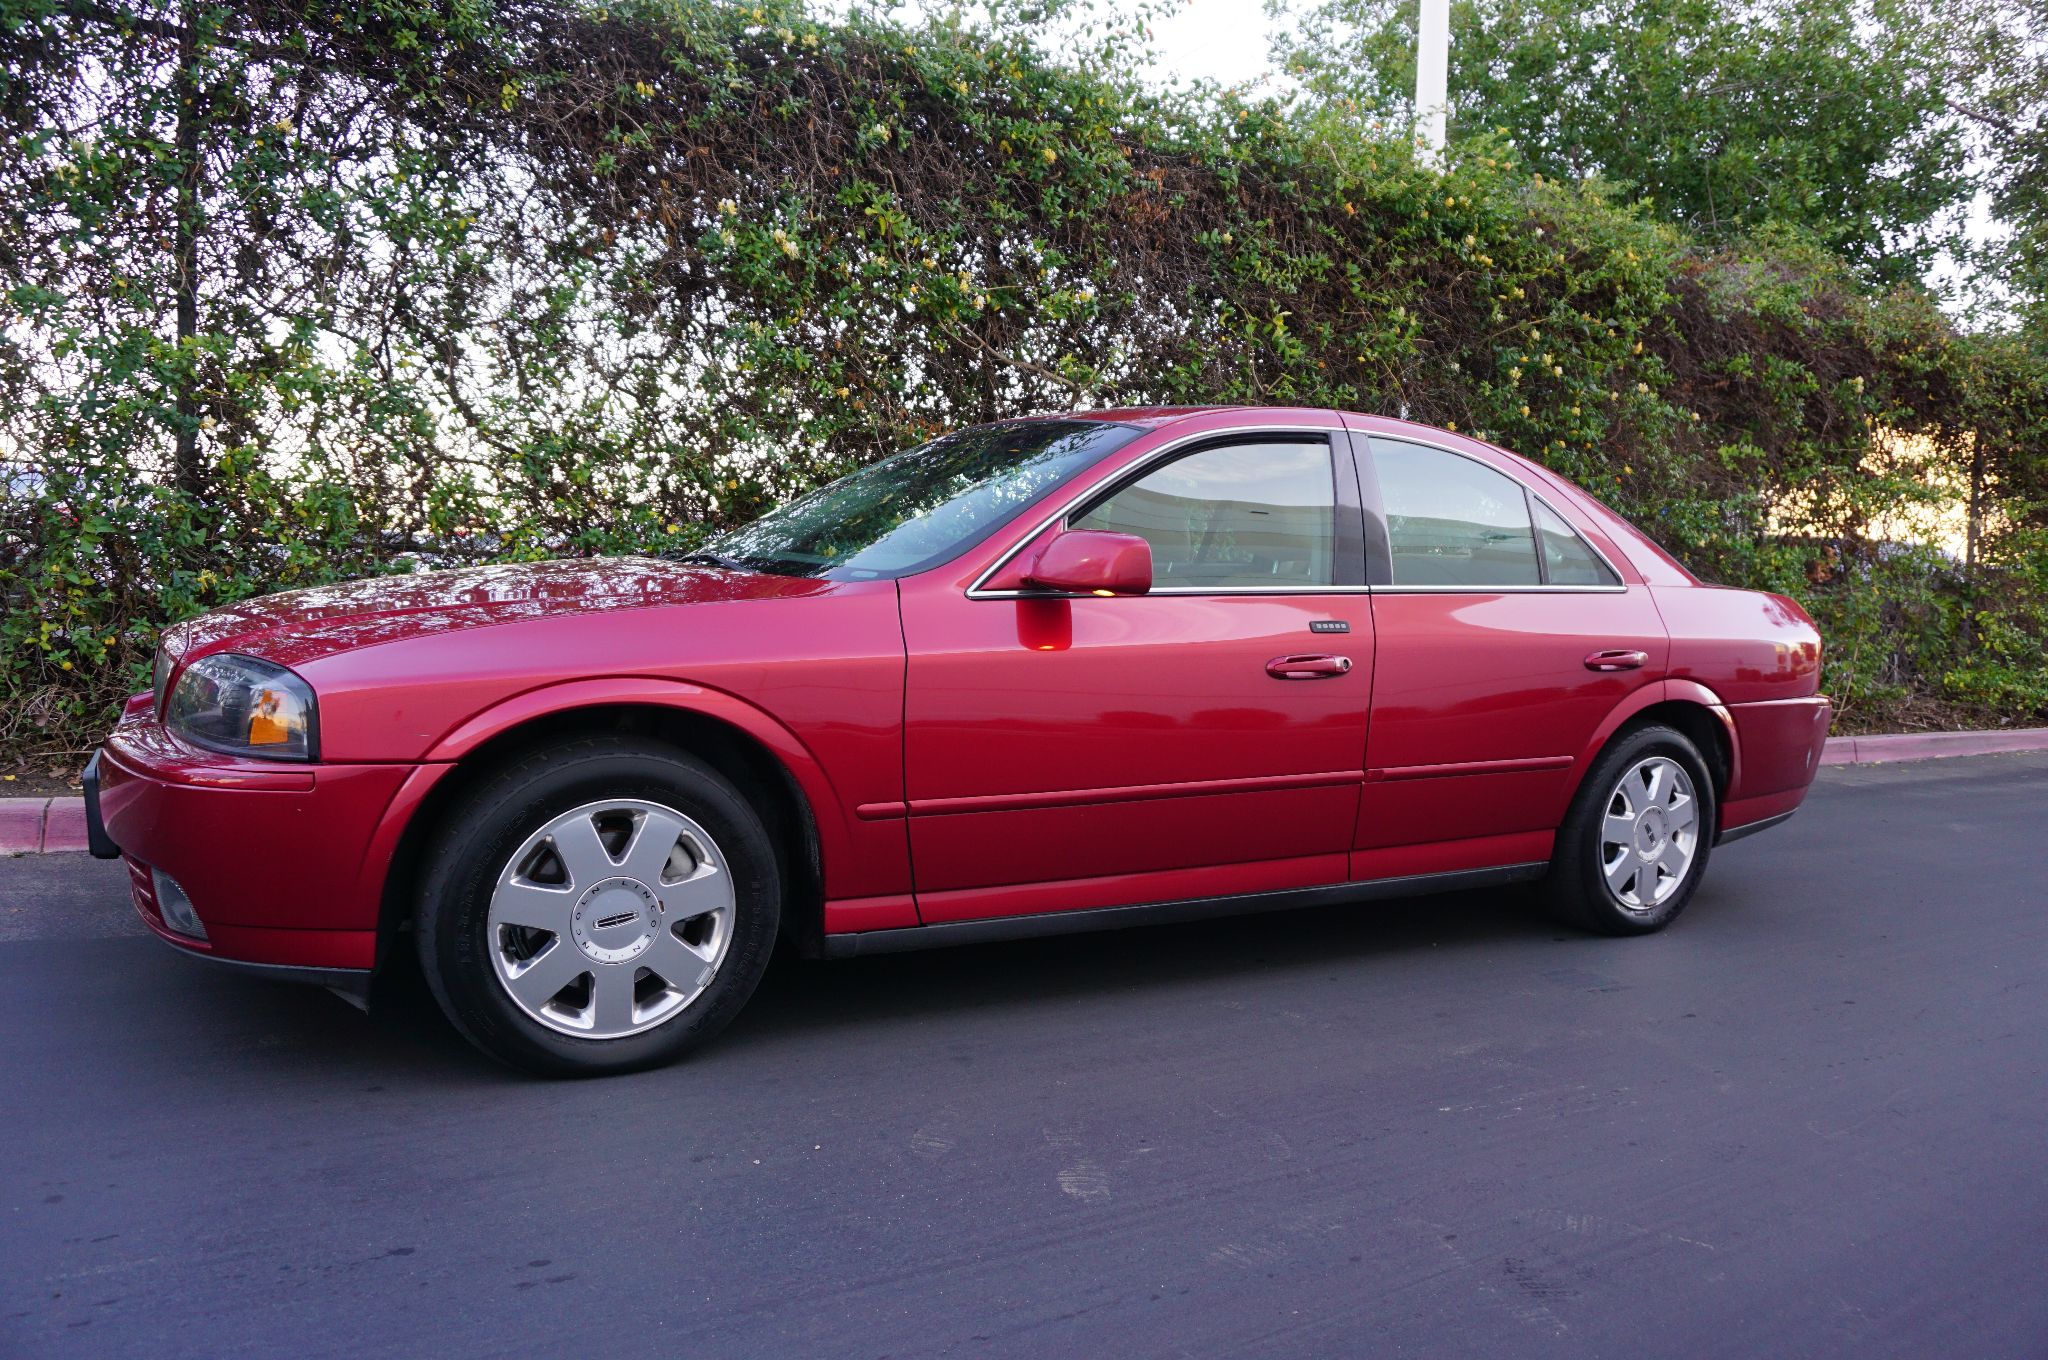 Used 2005 Lincoln LS S430 at City Cars Warehouse Inc